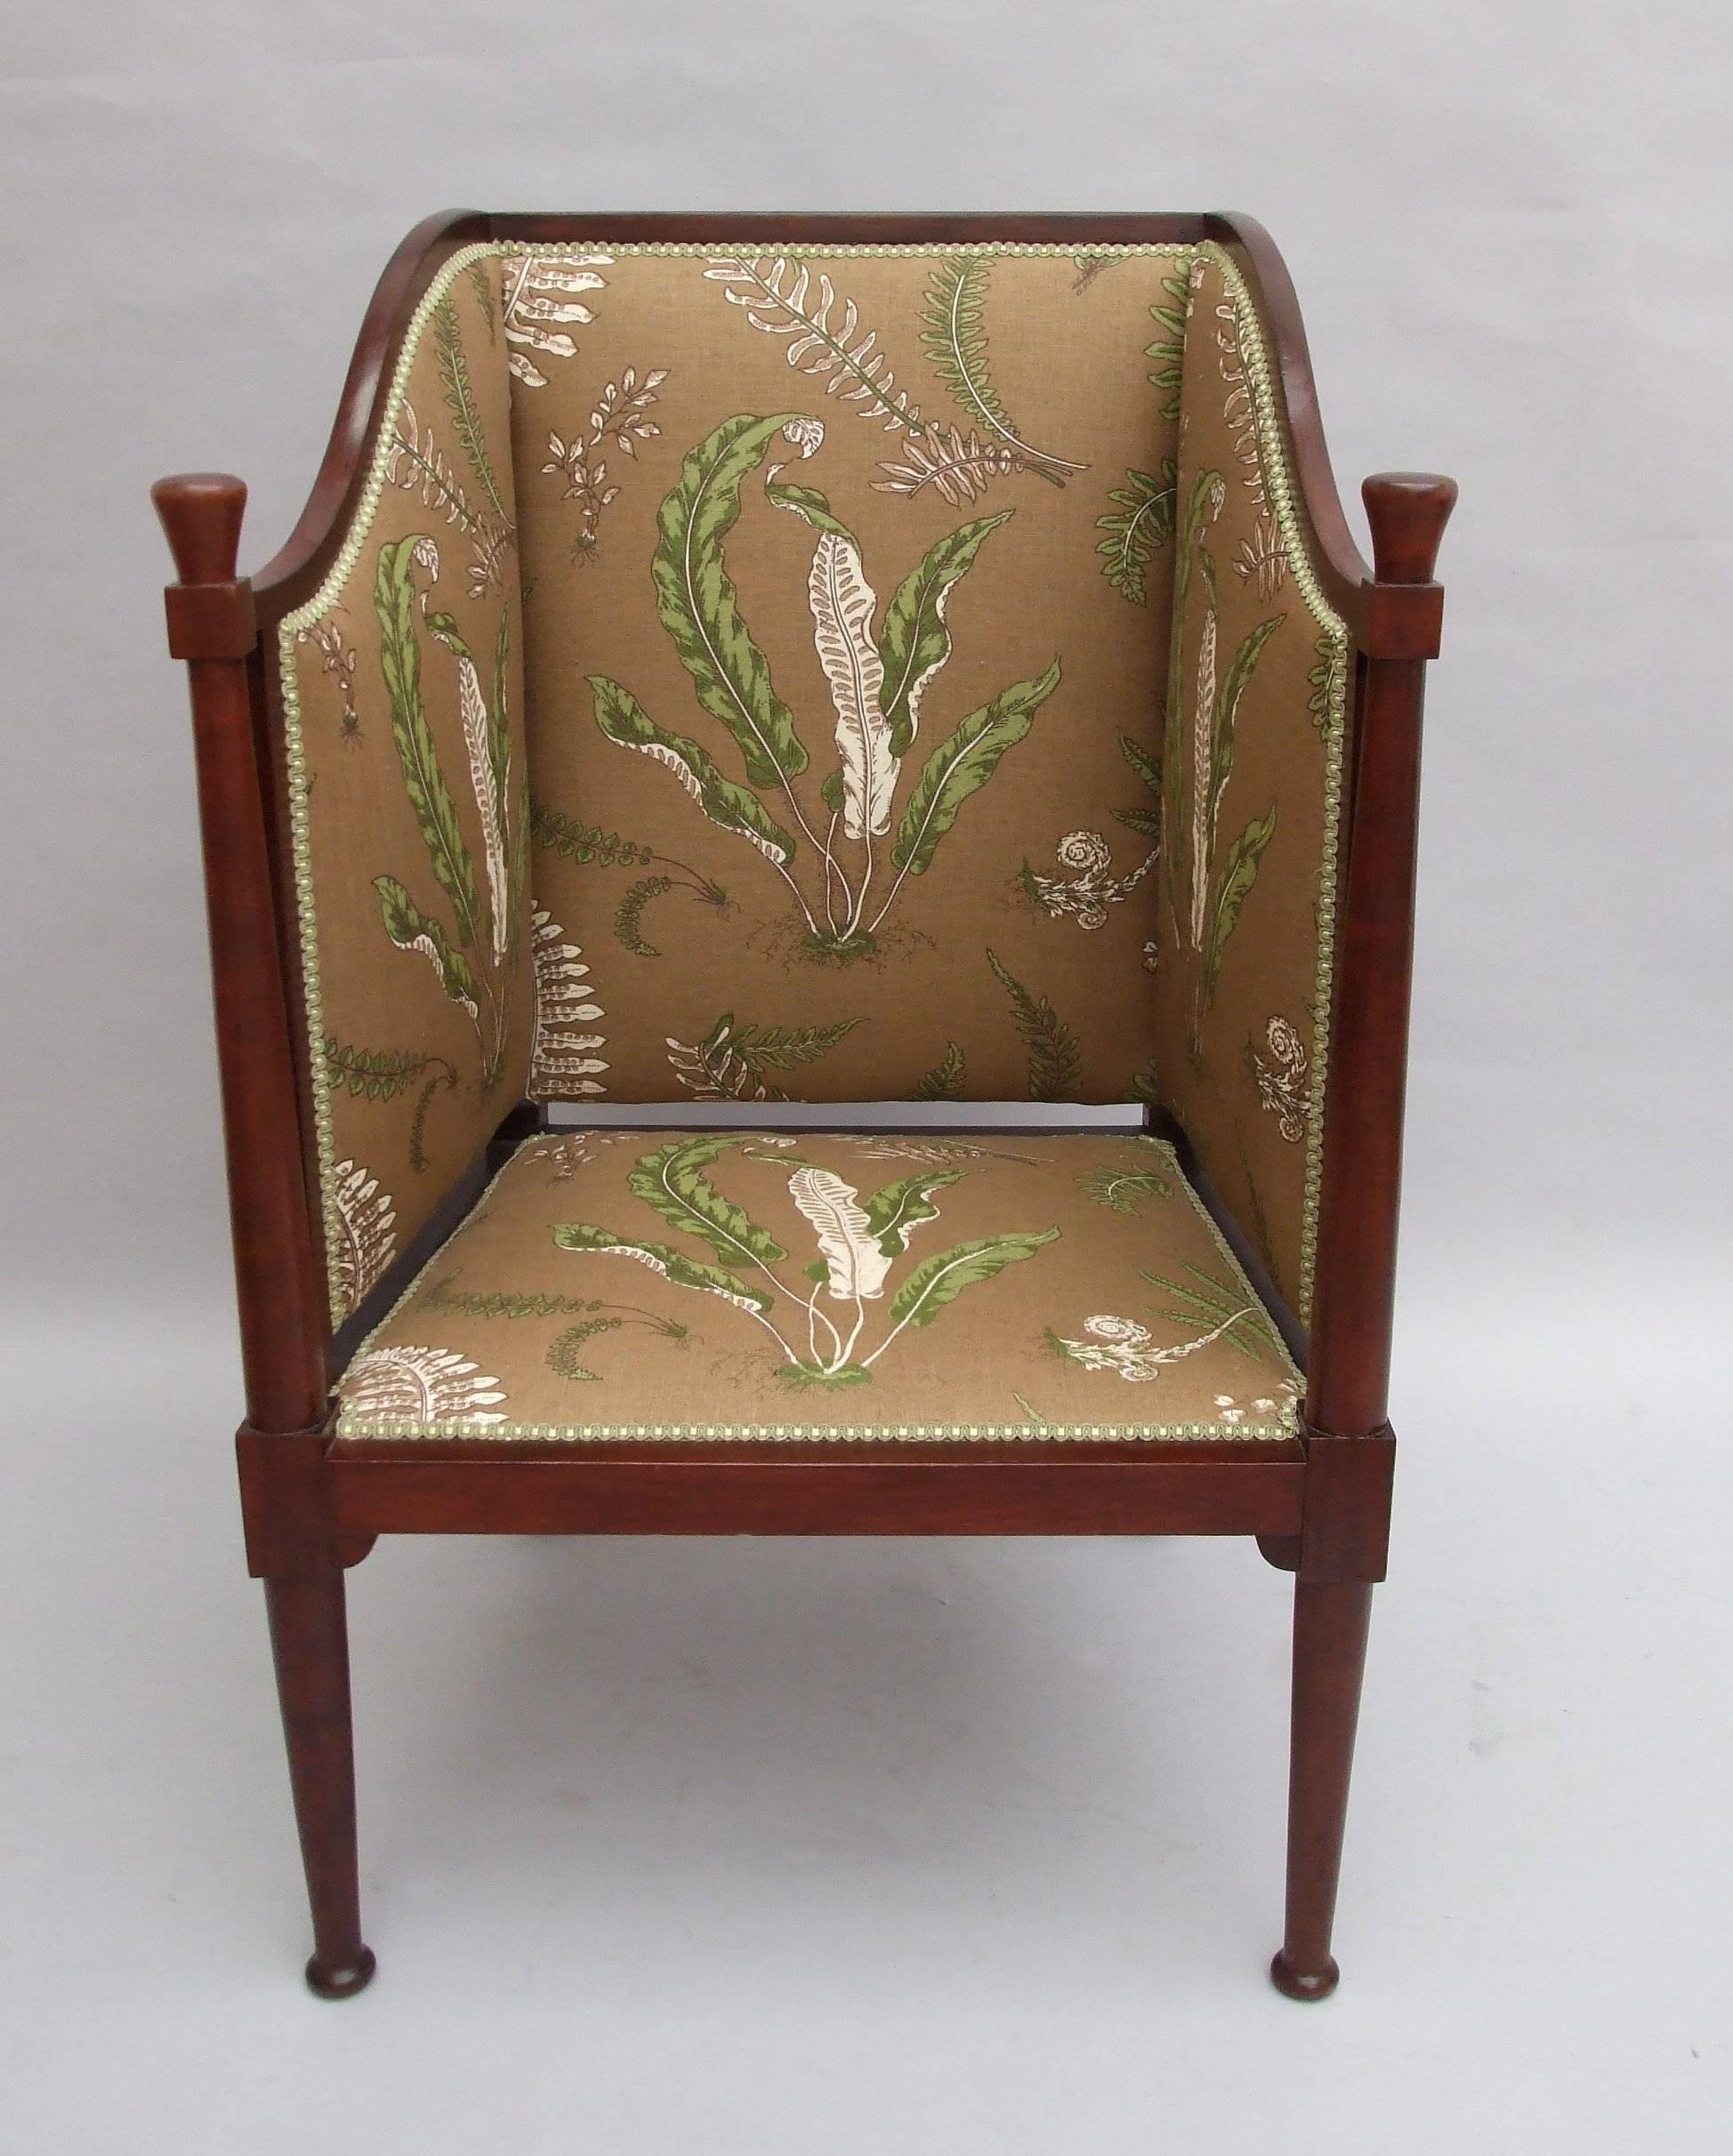 A mahogany Arts & Crafts high-sided wing chair with turned column front legs extended to finials, shaped sides, in the manner of Voysey, retailed by Liberty's, circa 1900, newly upholstered in fern pattern fabric, designed by Elsie de Wolfe,